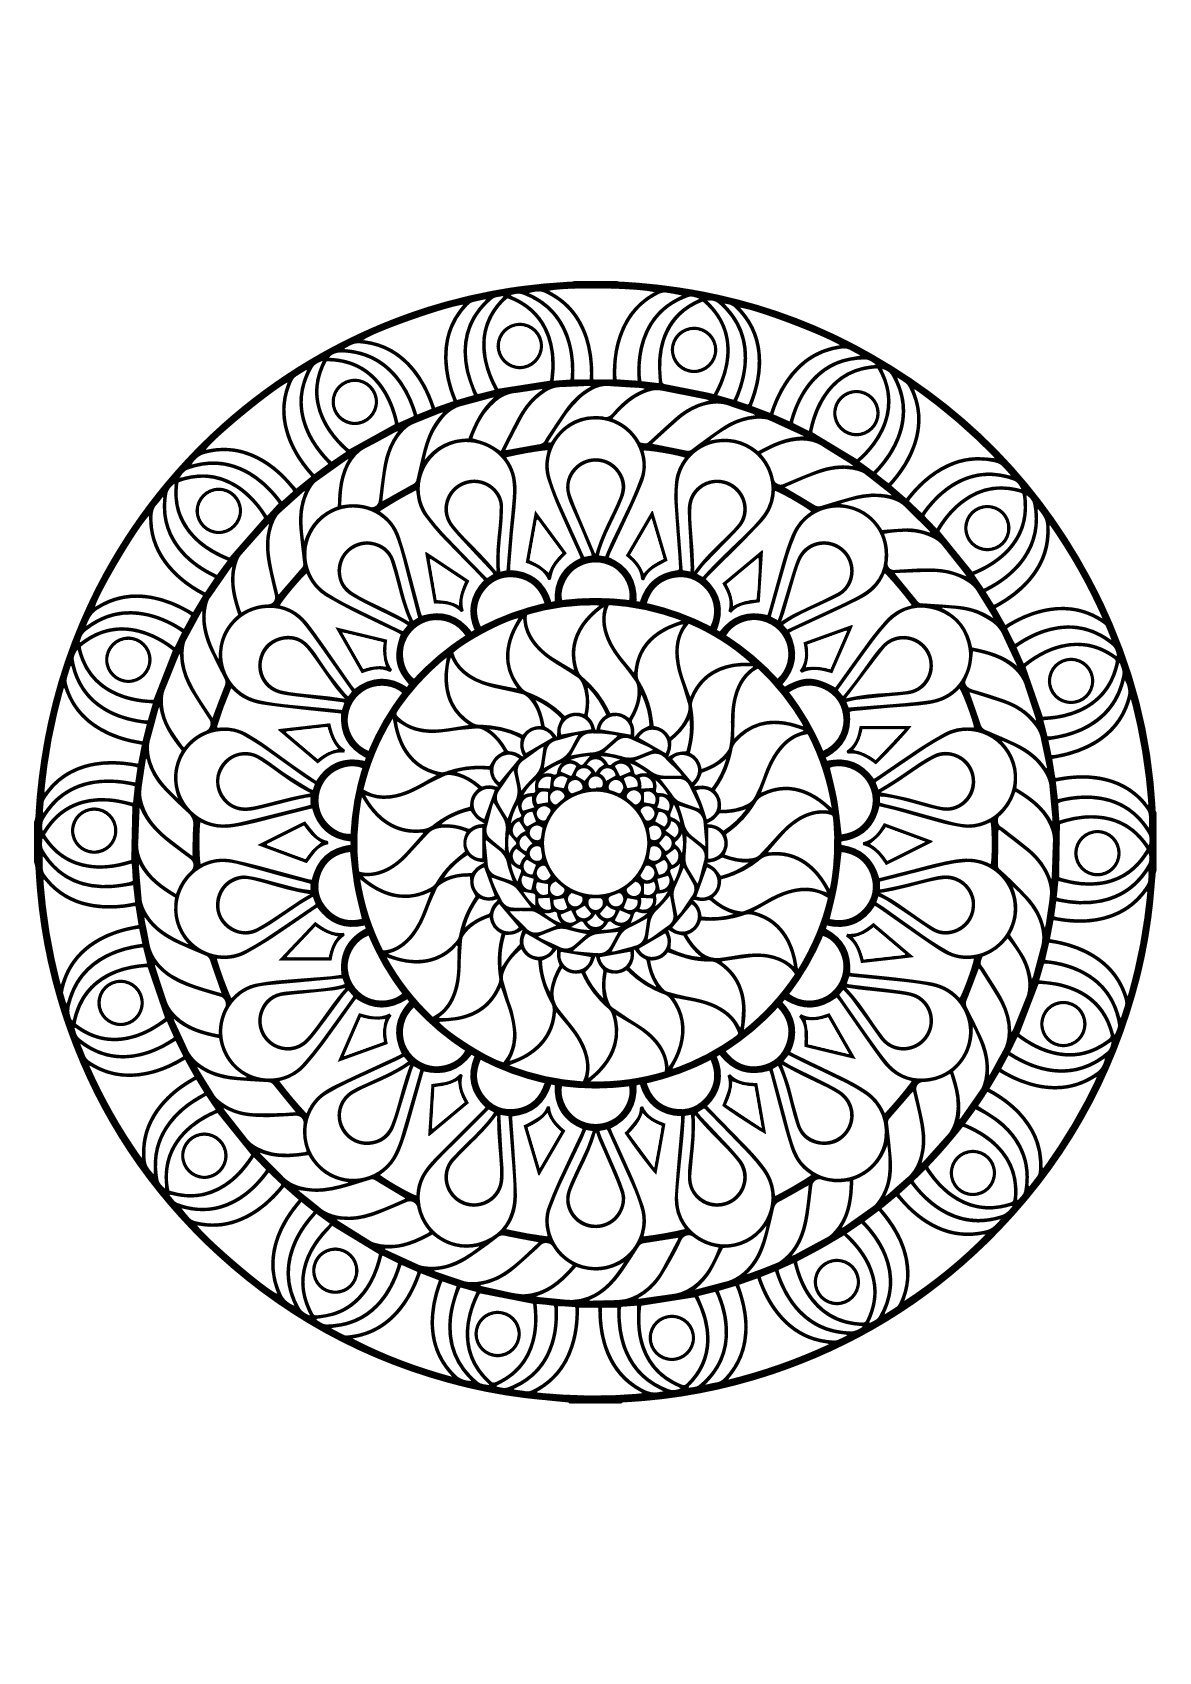 Download Mandalas free to color for children - Mandalas Kids Coloring Pages